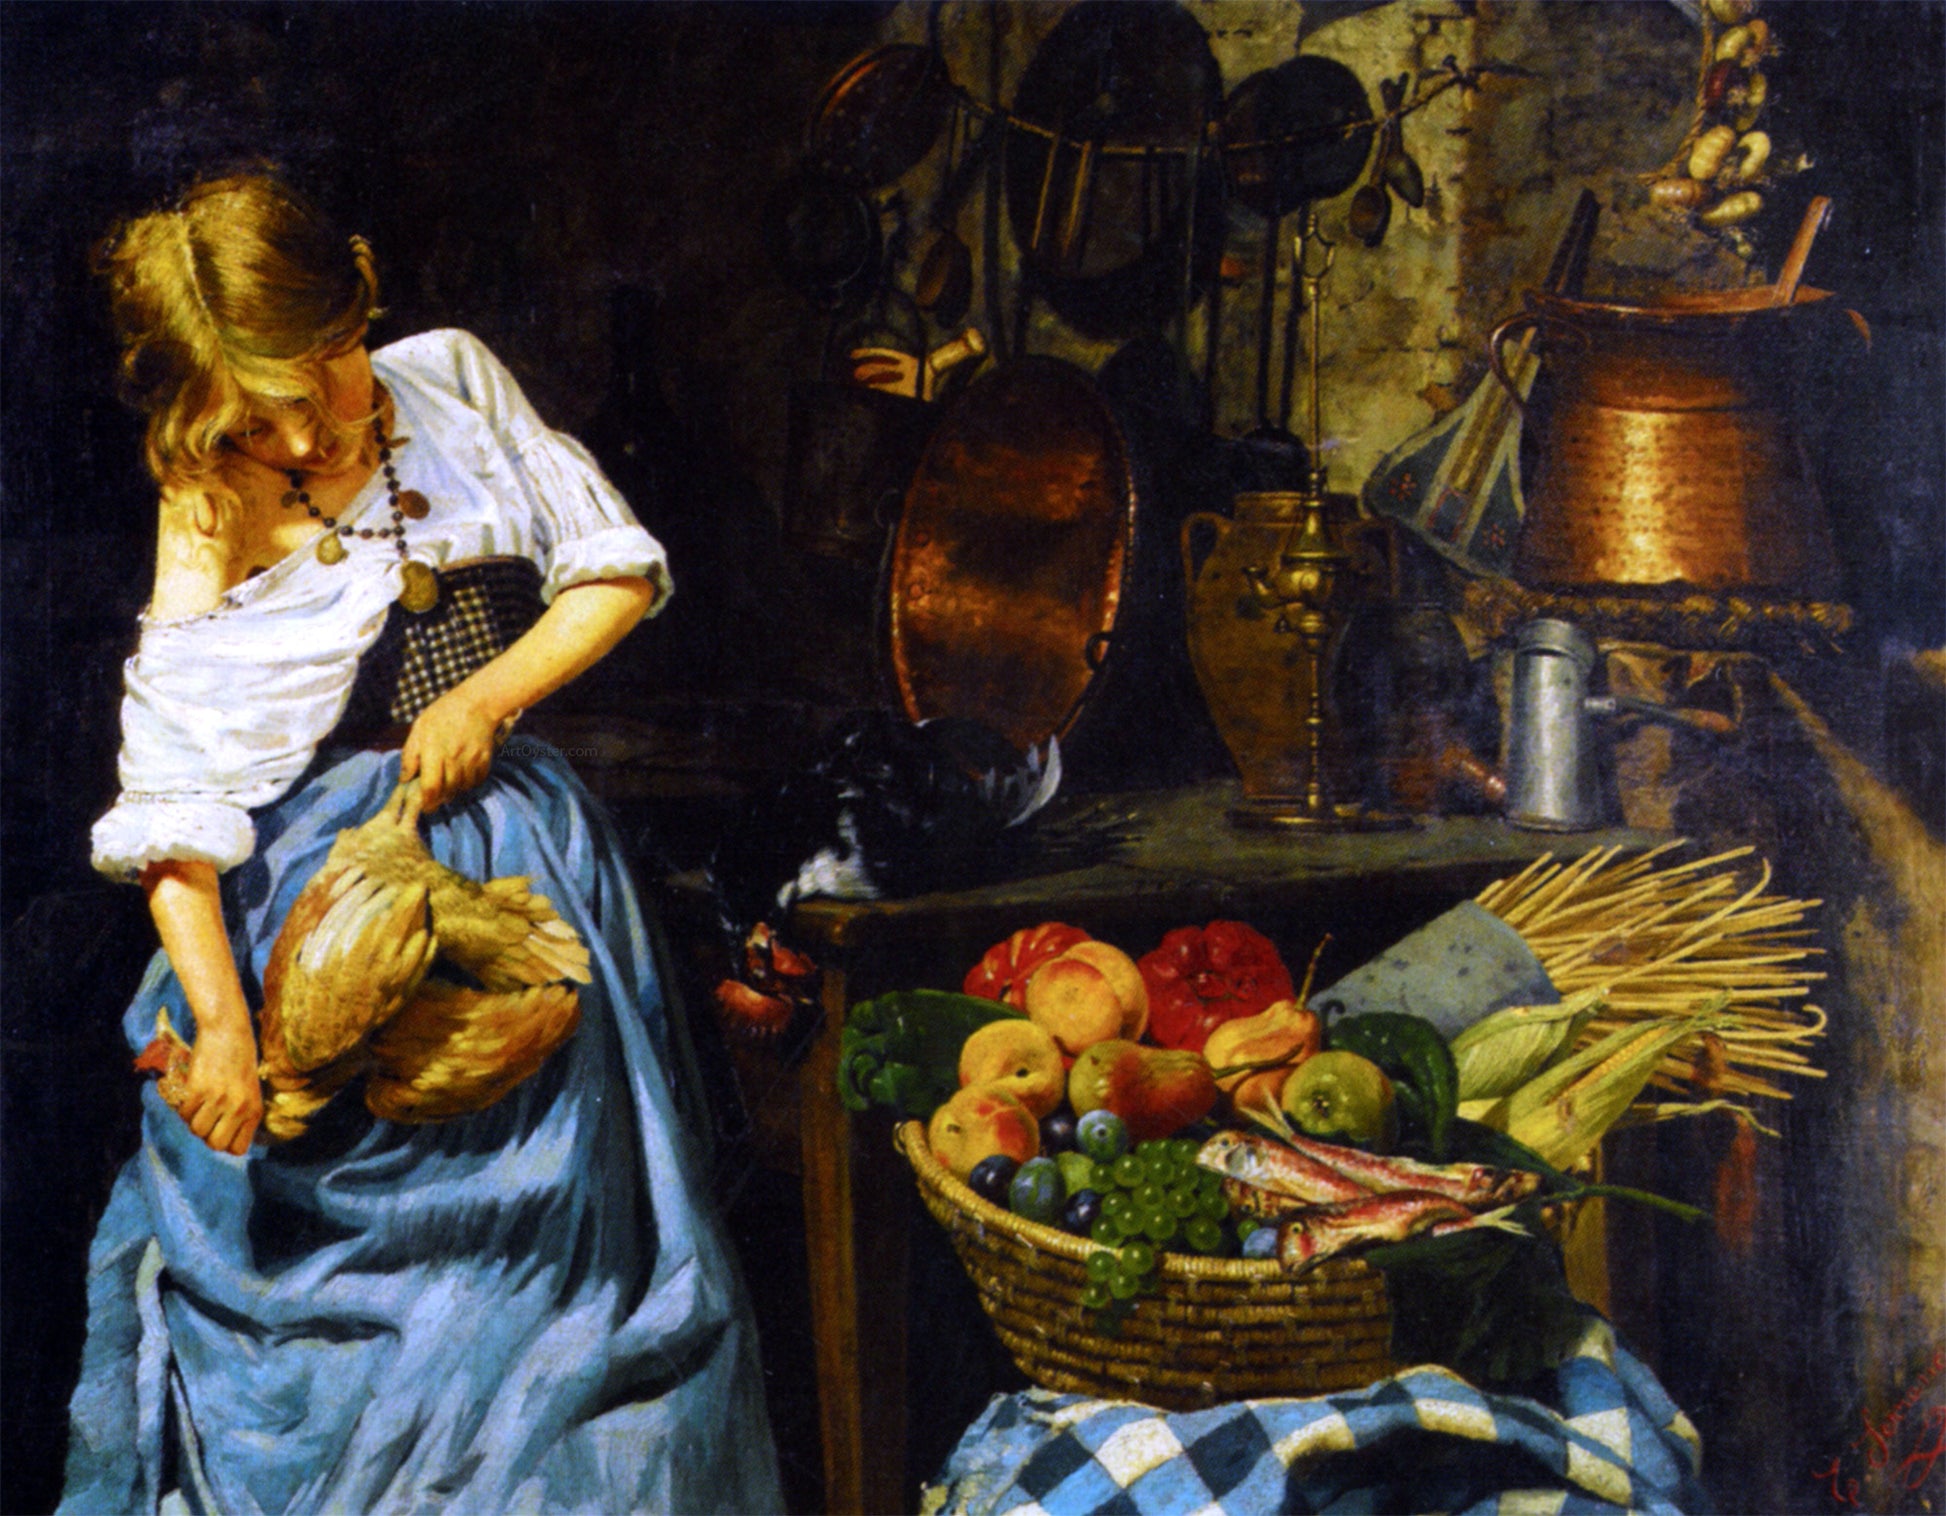  Emanuele Serrano Preparing the Meal - Hand Painted Oil Painting